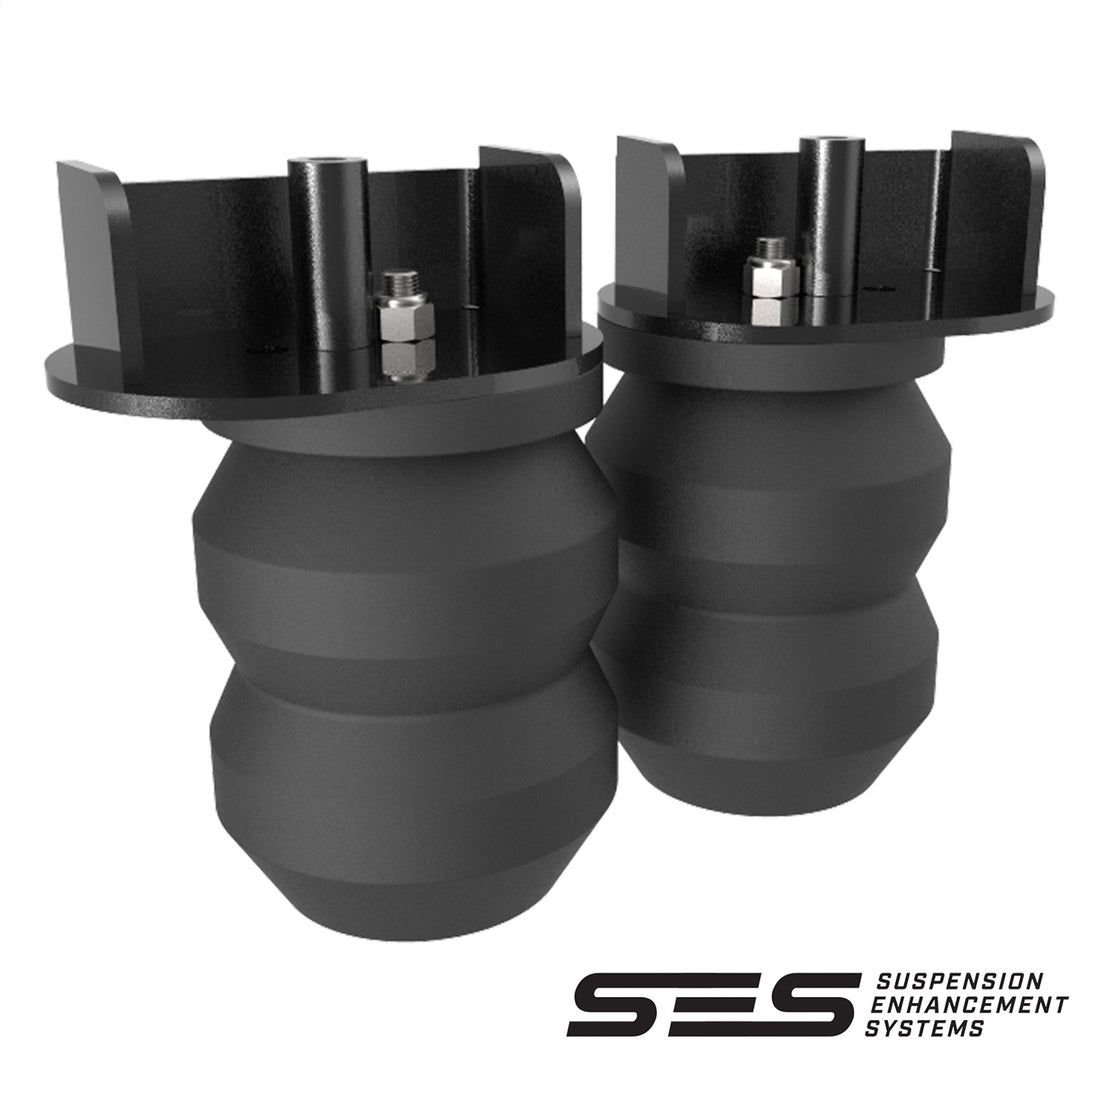 Timbren Suspension Enhancement System Rear Kit for 1999-2014 Ford F350 Super Duty 4WD RWD